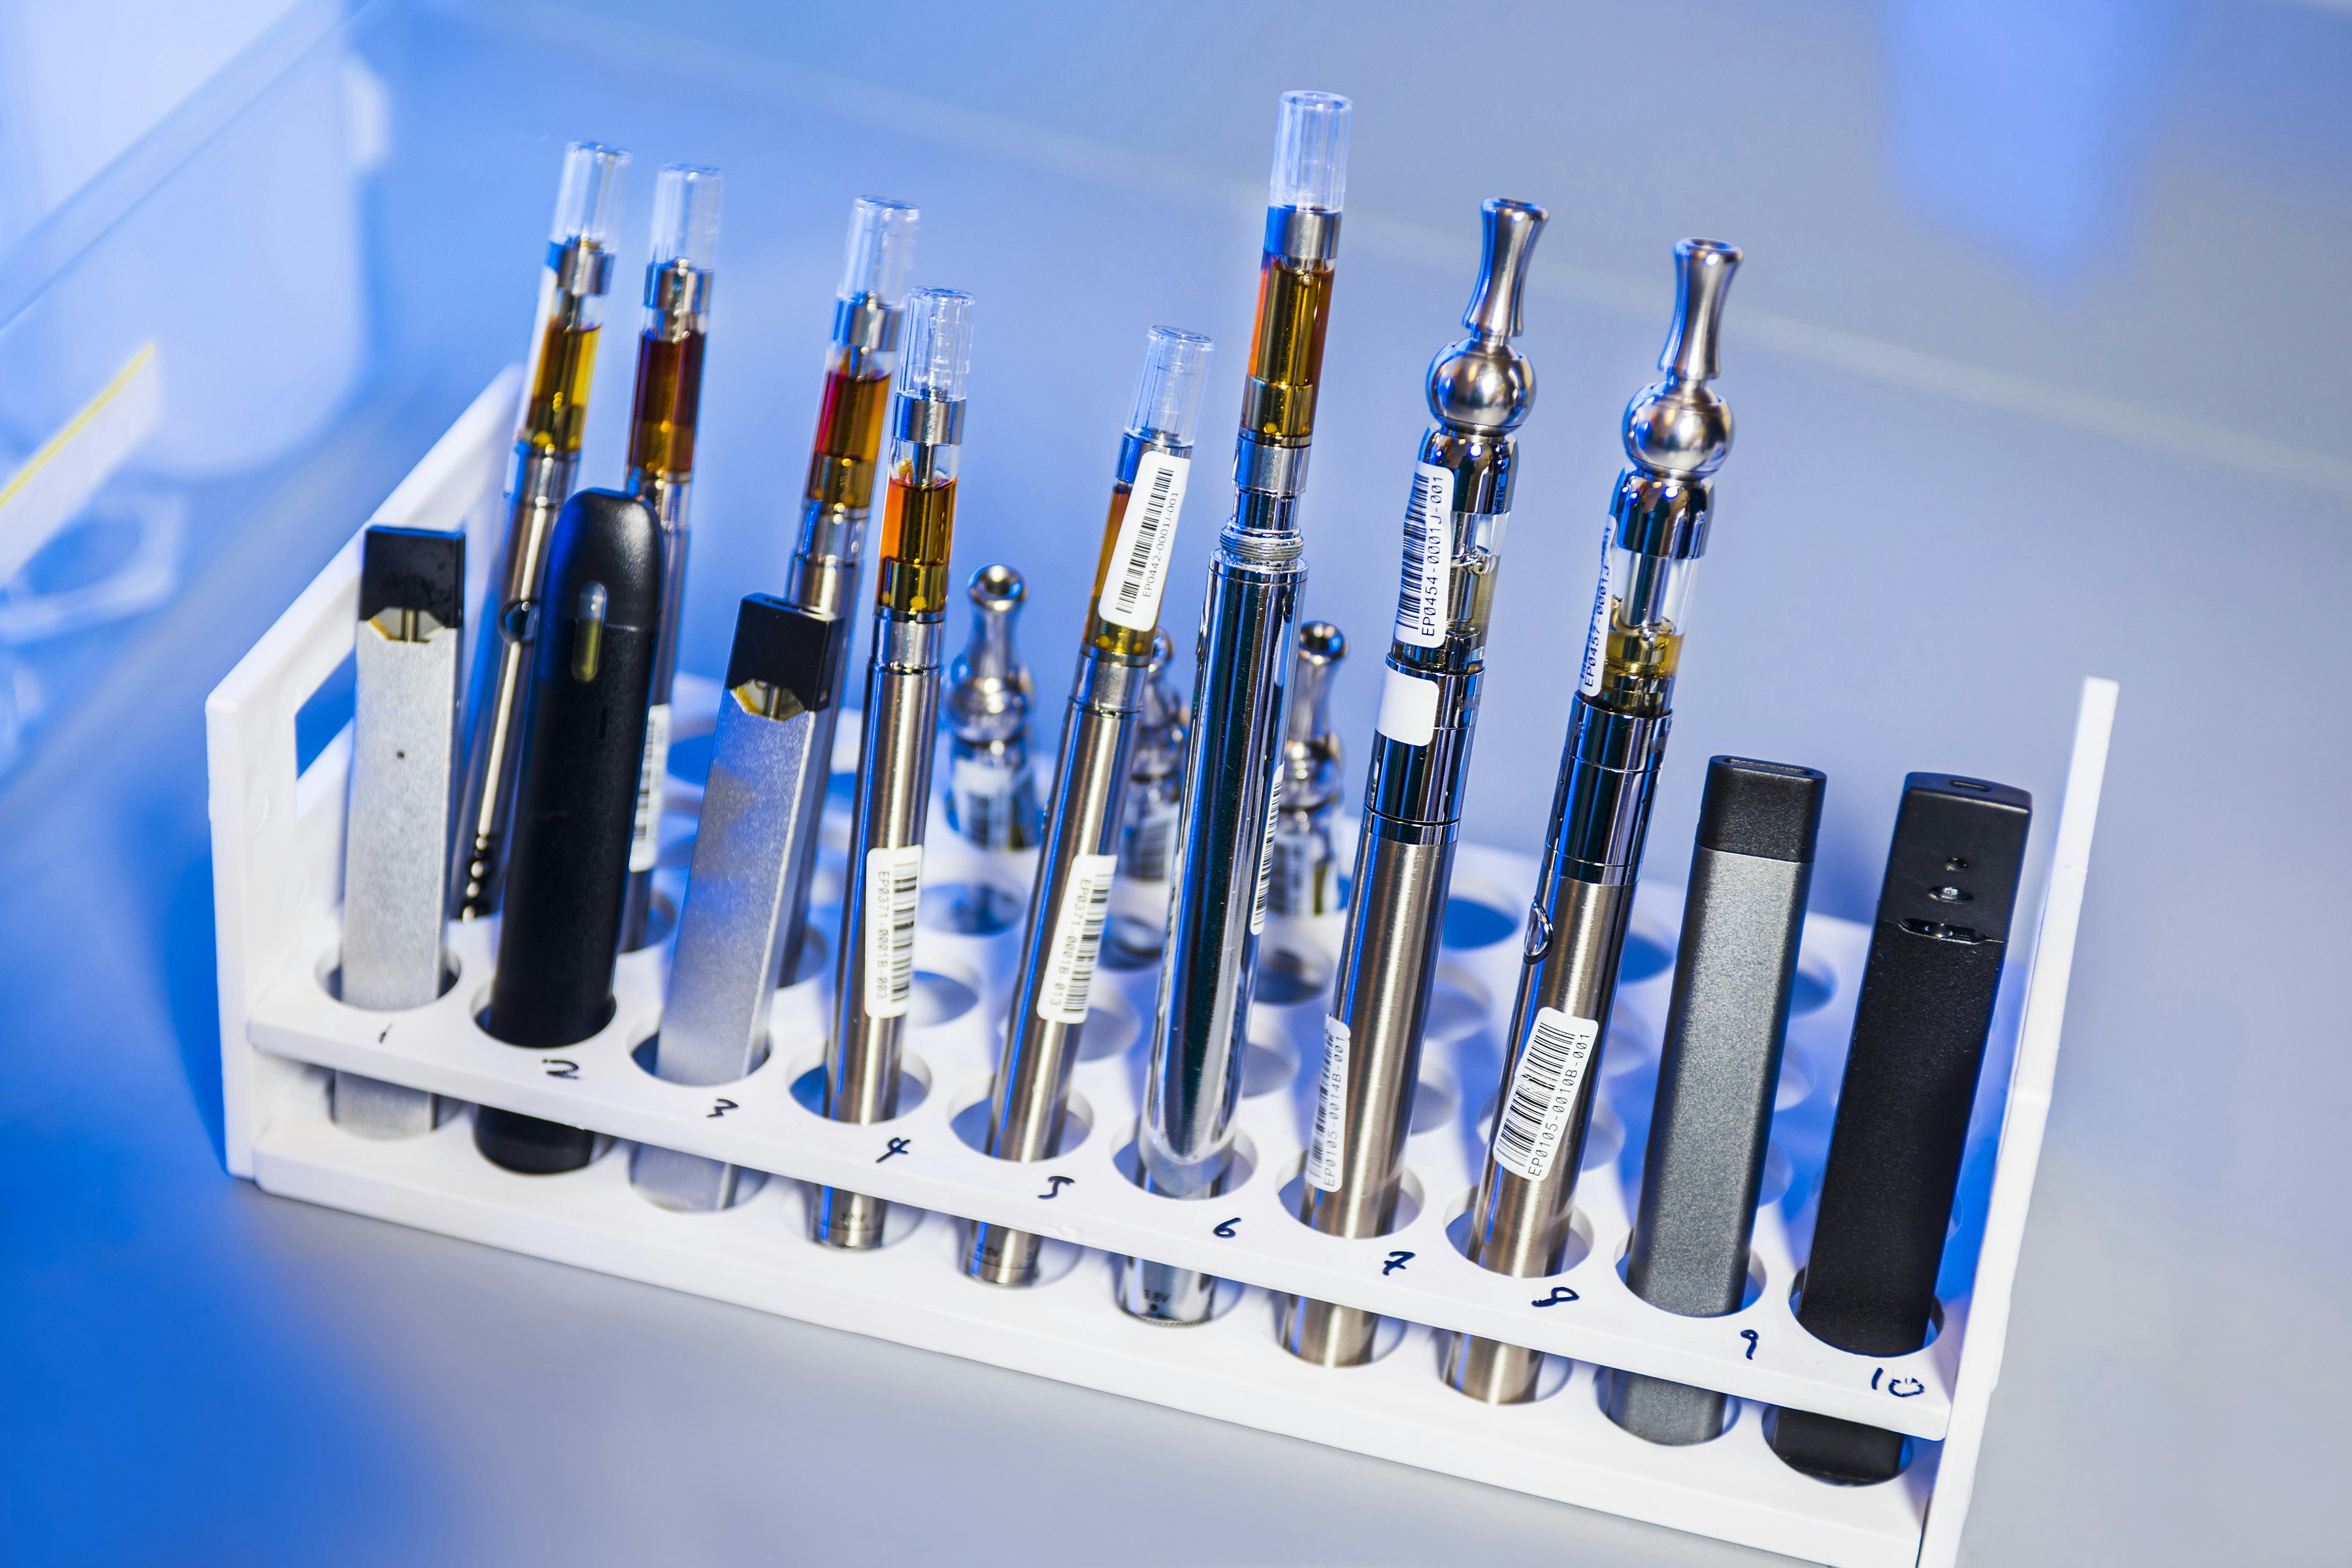 This image depicted a test tube rack that had been stocked with examples of various electronic cigarettes, referred to as e-cigarettes, or e-cigs, and vaping pens. These items would undergo testing in...